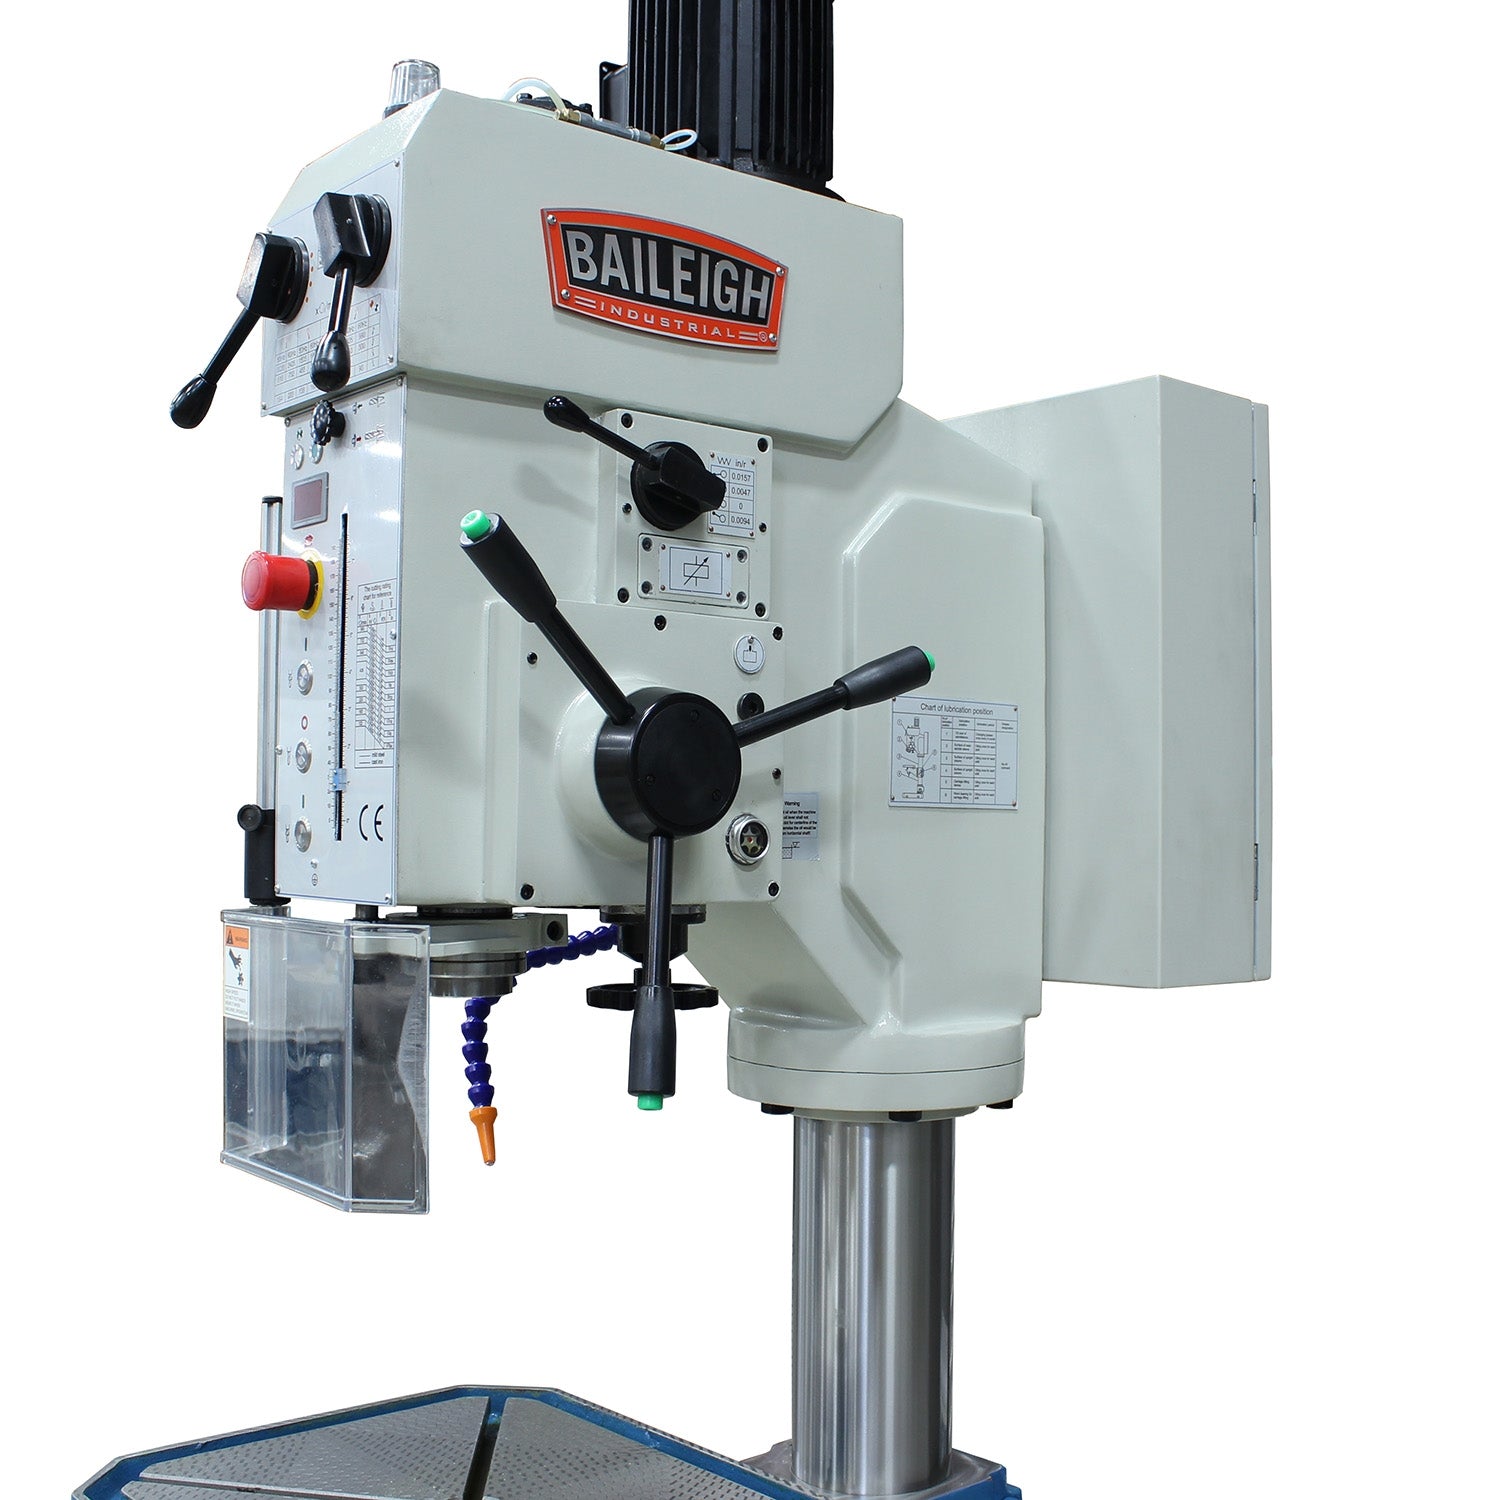 Baileigh DP-1850G 220V 3 Phase Gear Driven Drill Press Power Feed, Coolant System, MT4 Spindle